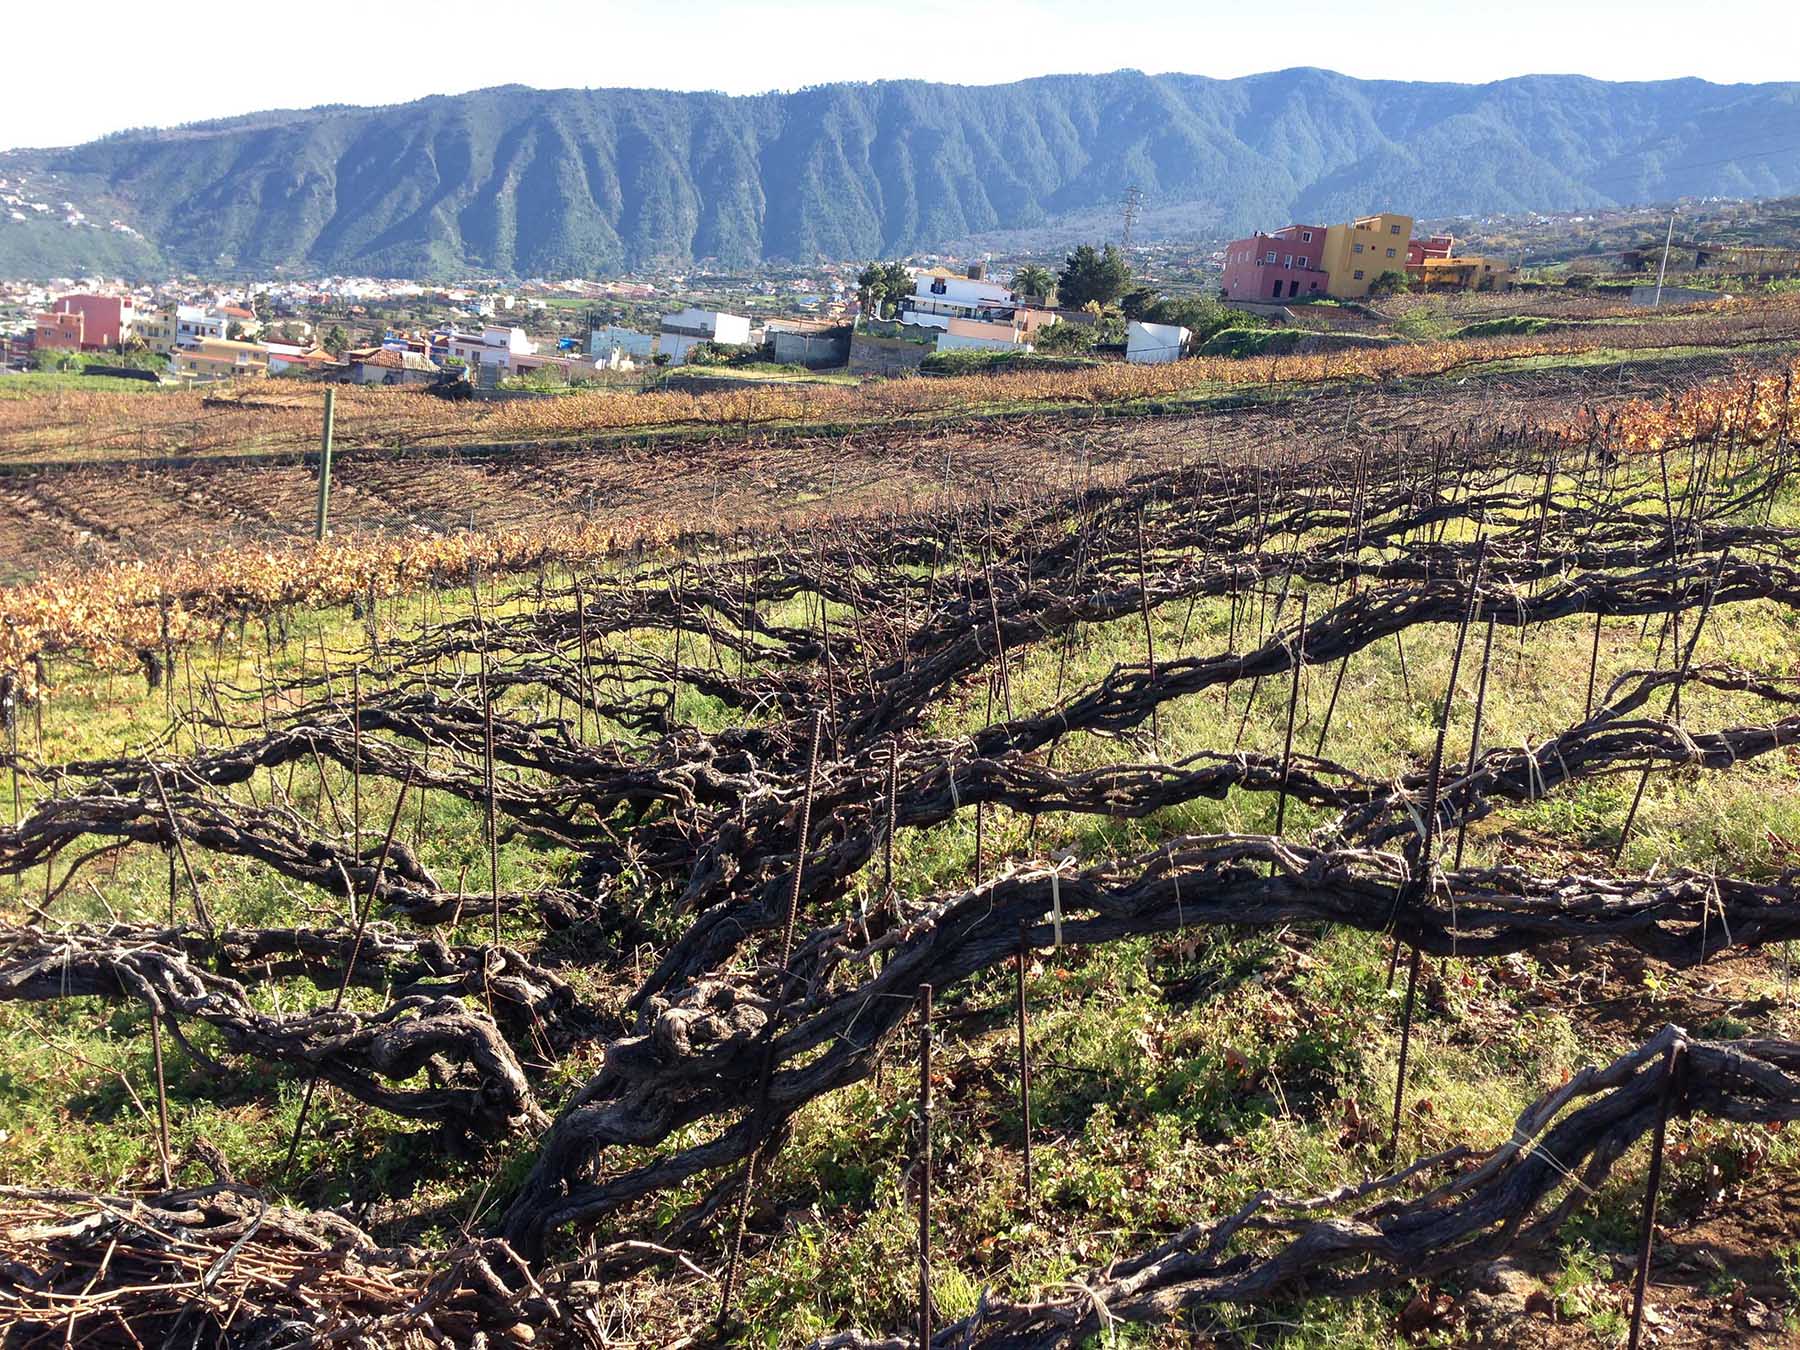 The volcanic vineyards in Tenerife express 'reduction' due to their soils, rather than winemaking alone.